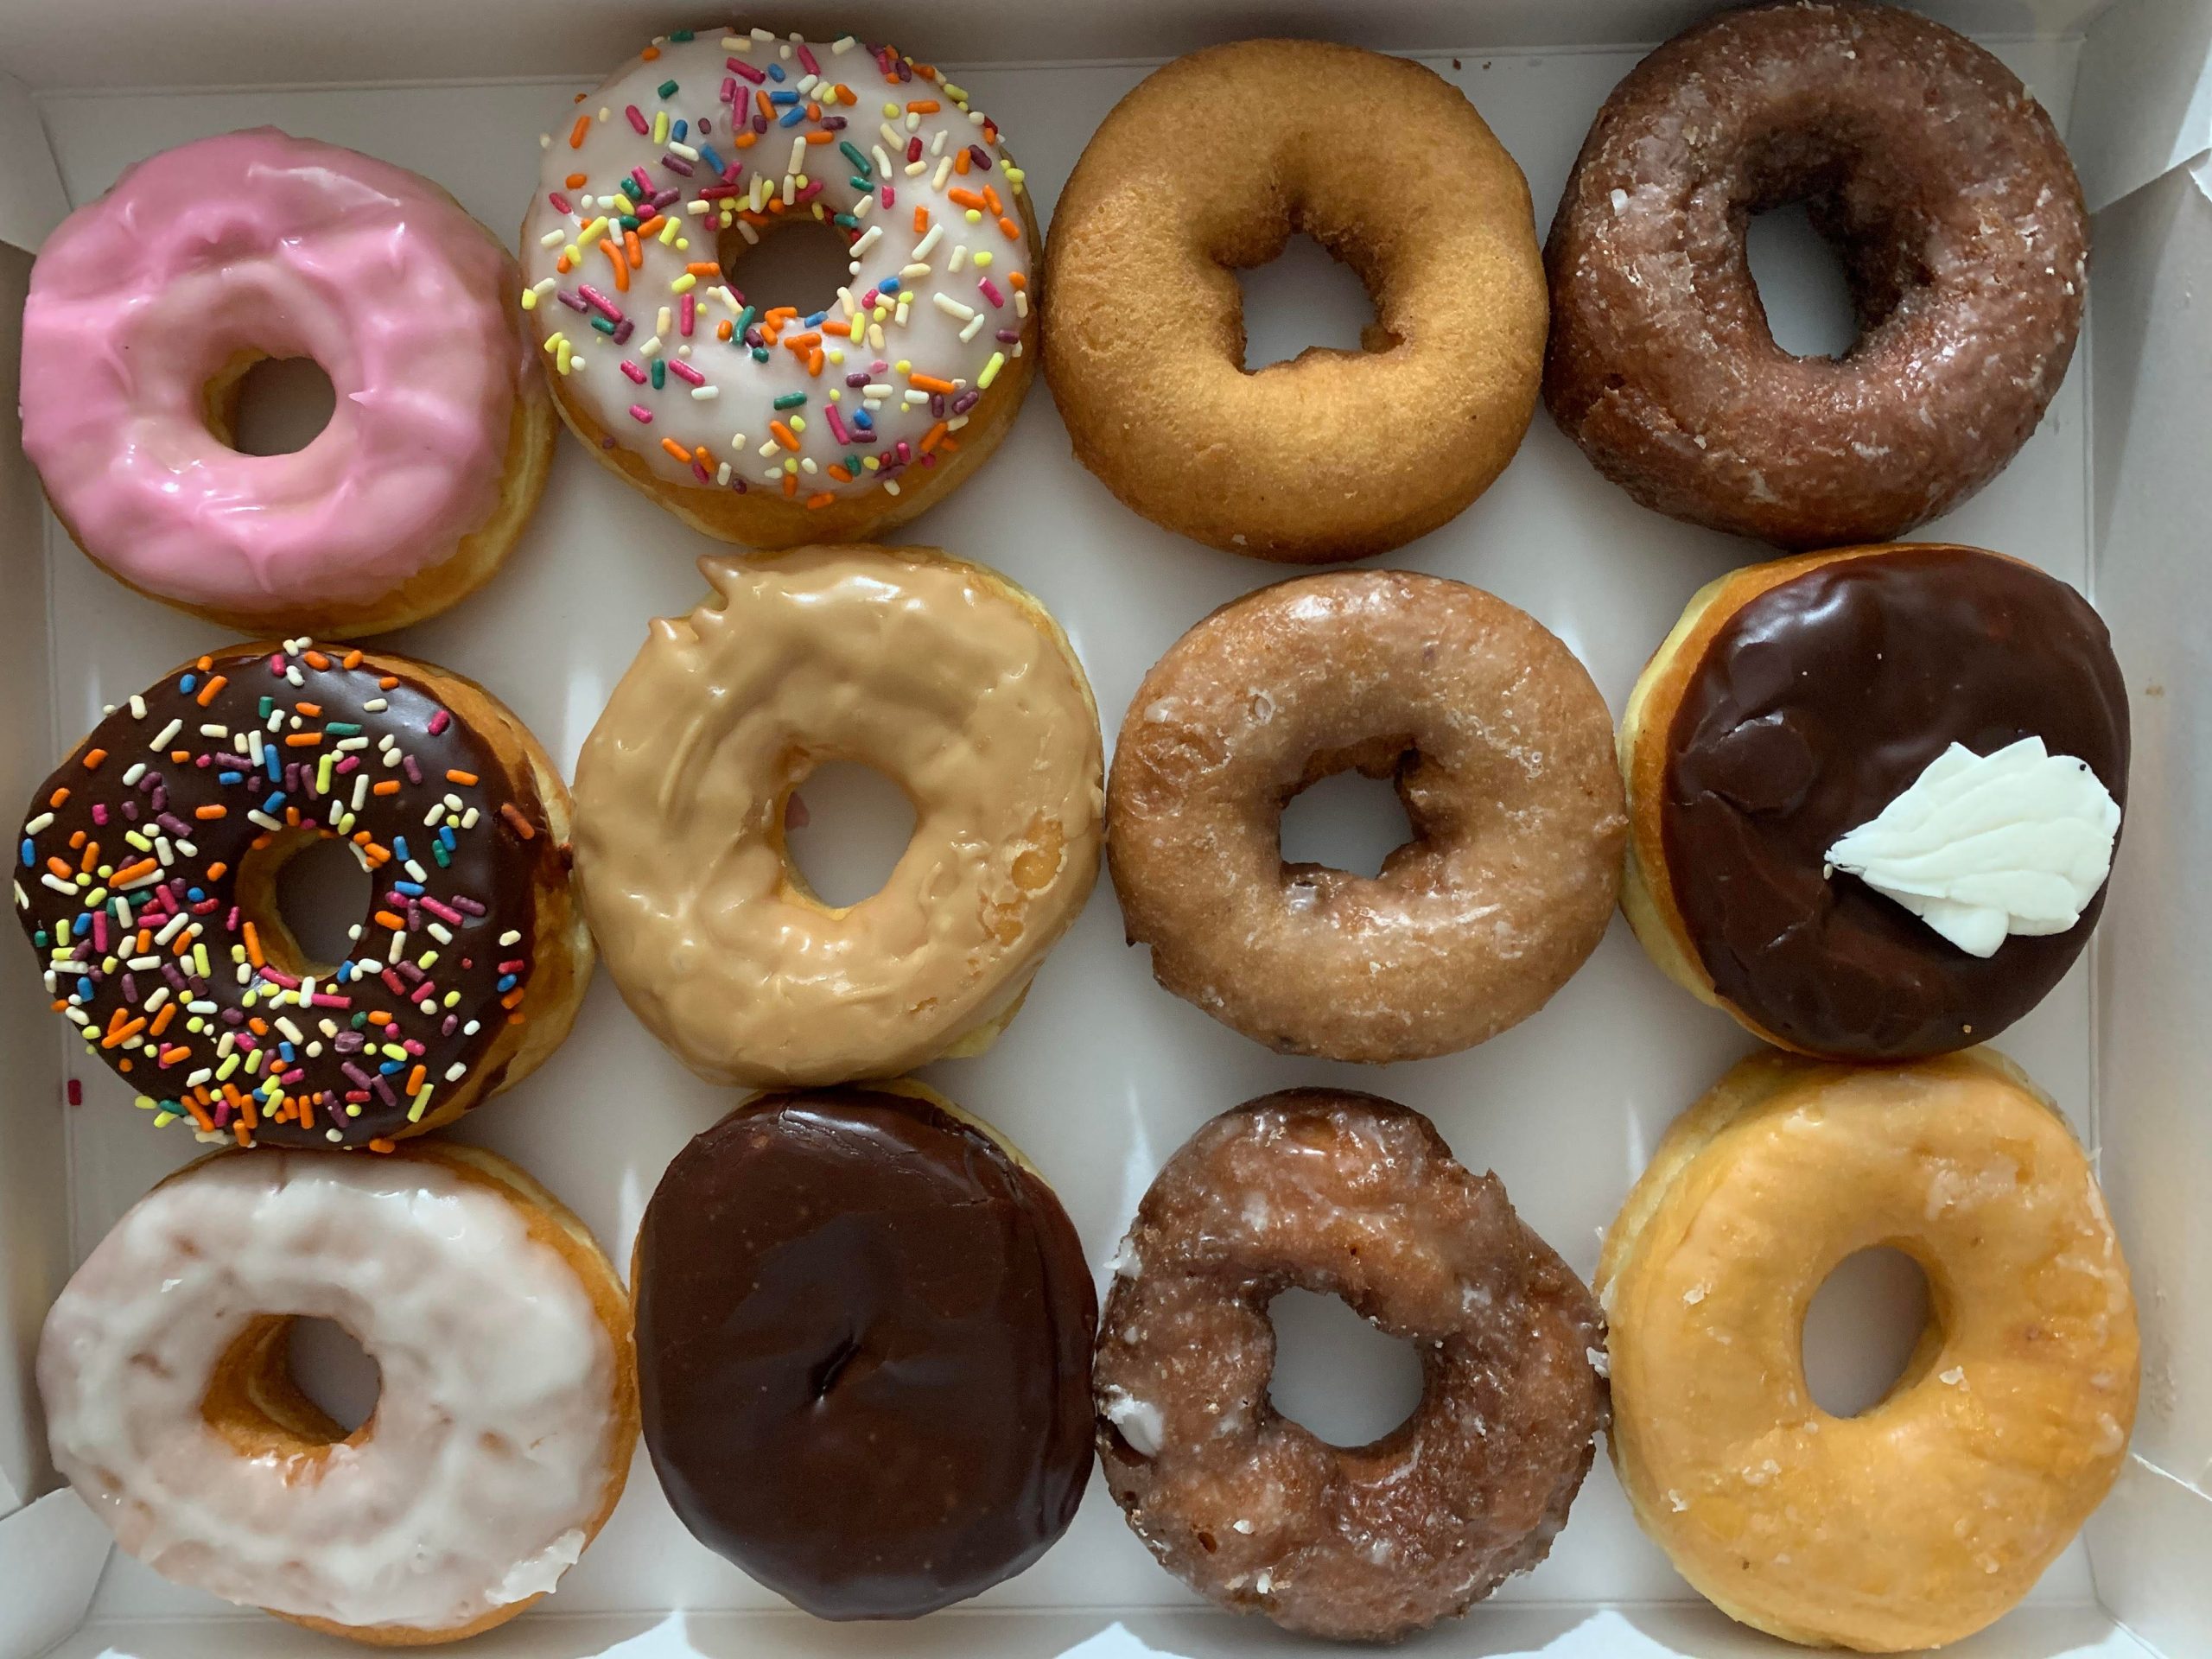 Assorted dozen donuts from Dunkin Donuts